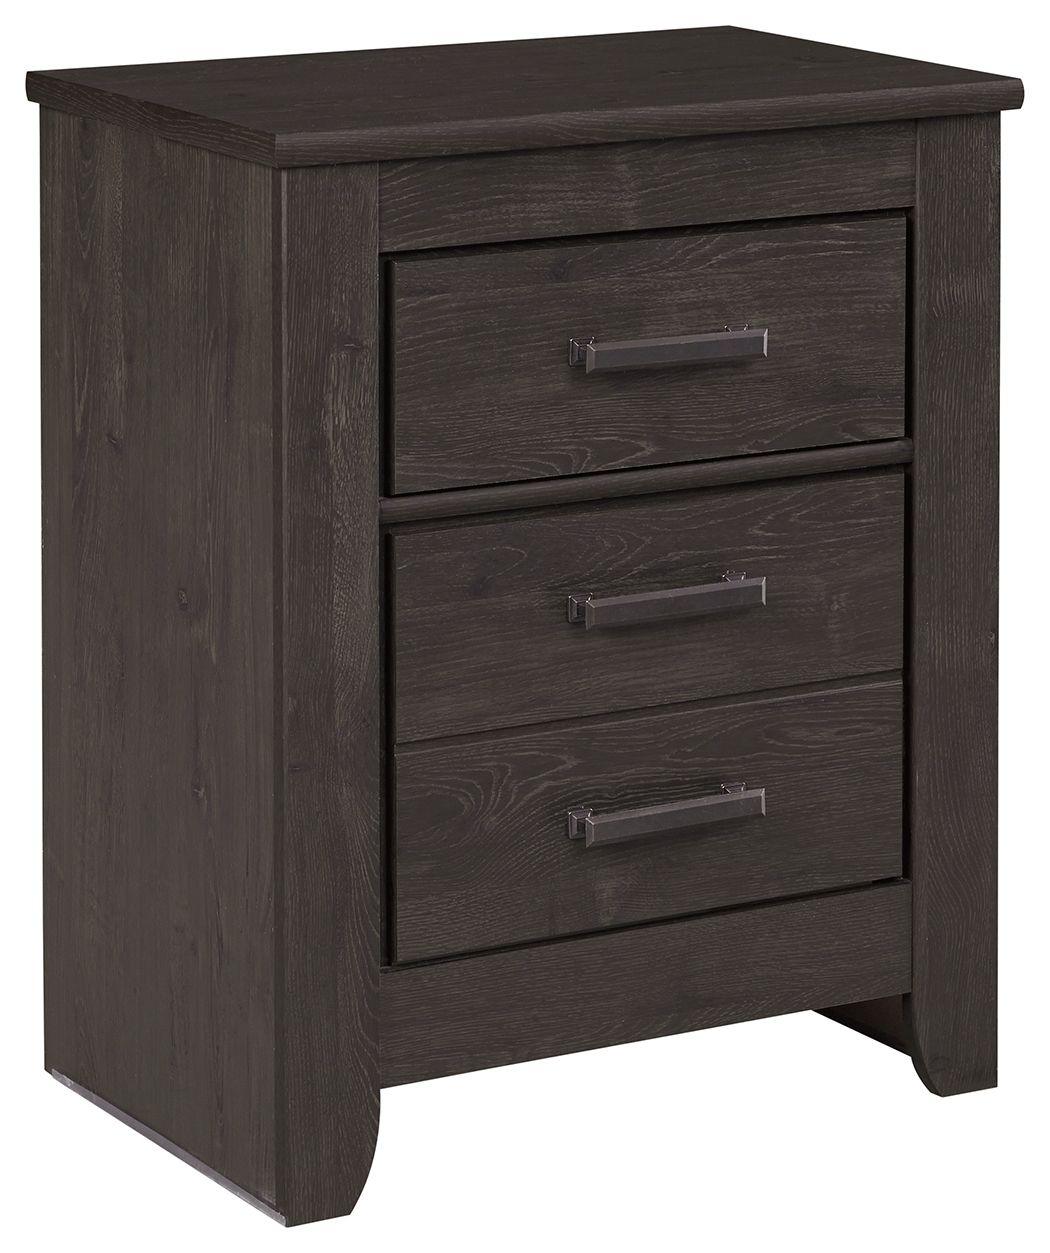 Ashley Furniture - Brinxton - Charcoal - Two Drawer Night Stand - 5th Avenue Furniture